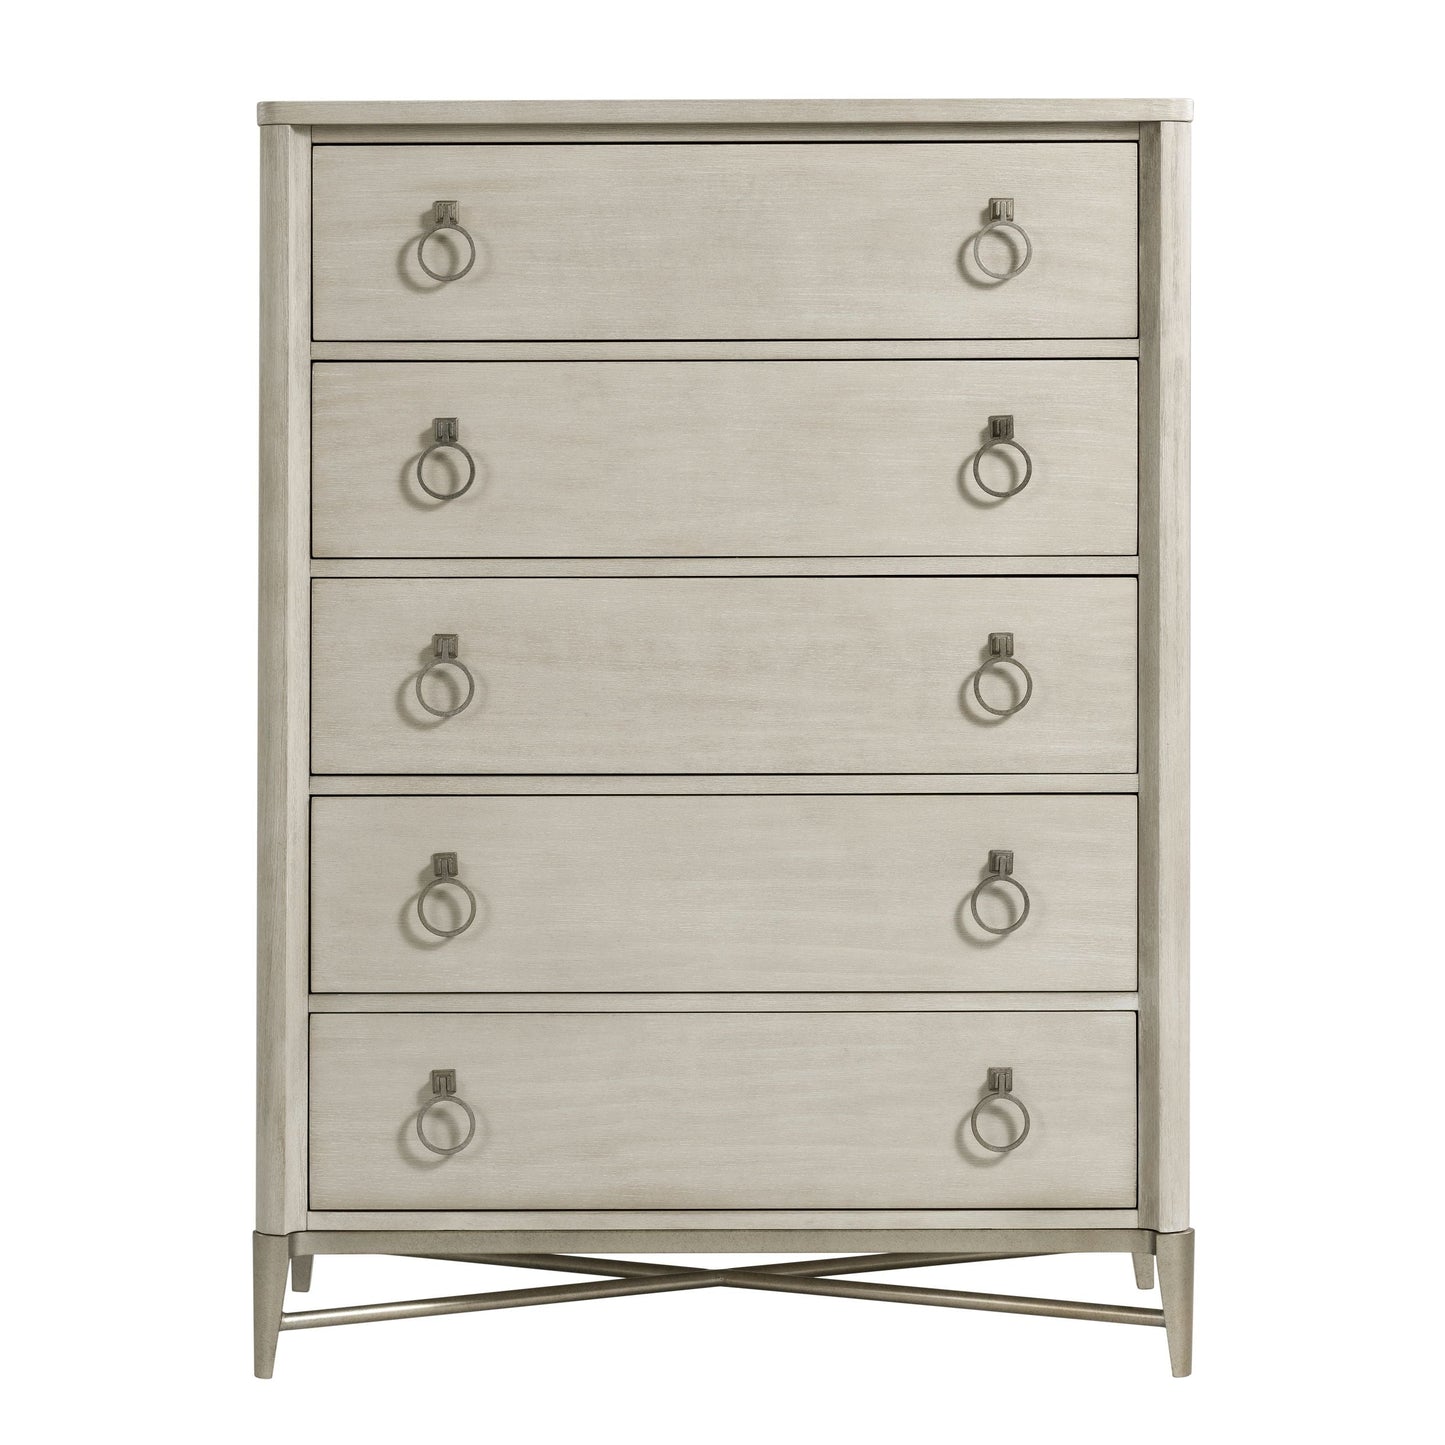 Mantalia Solid Wood Bedroom Collection, Champagne